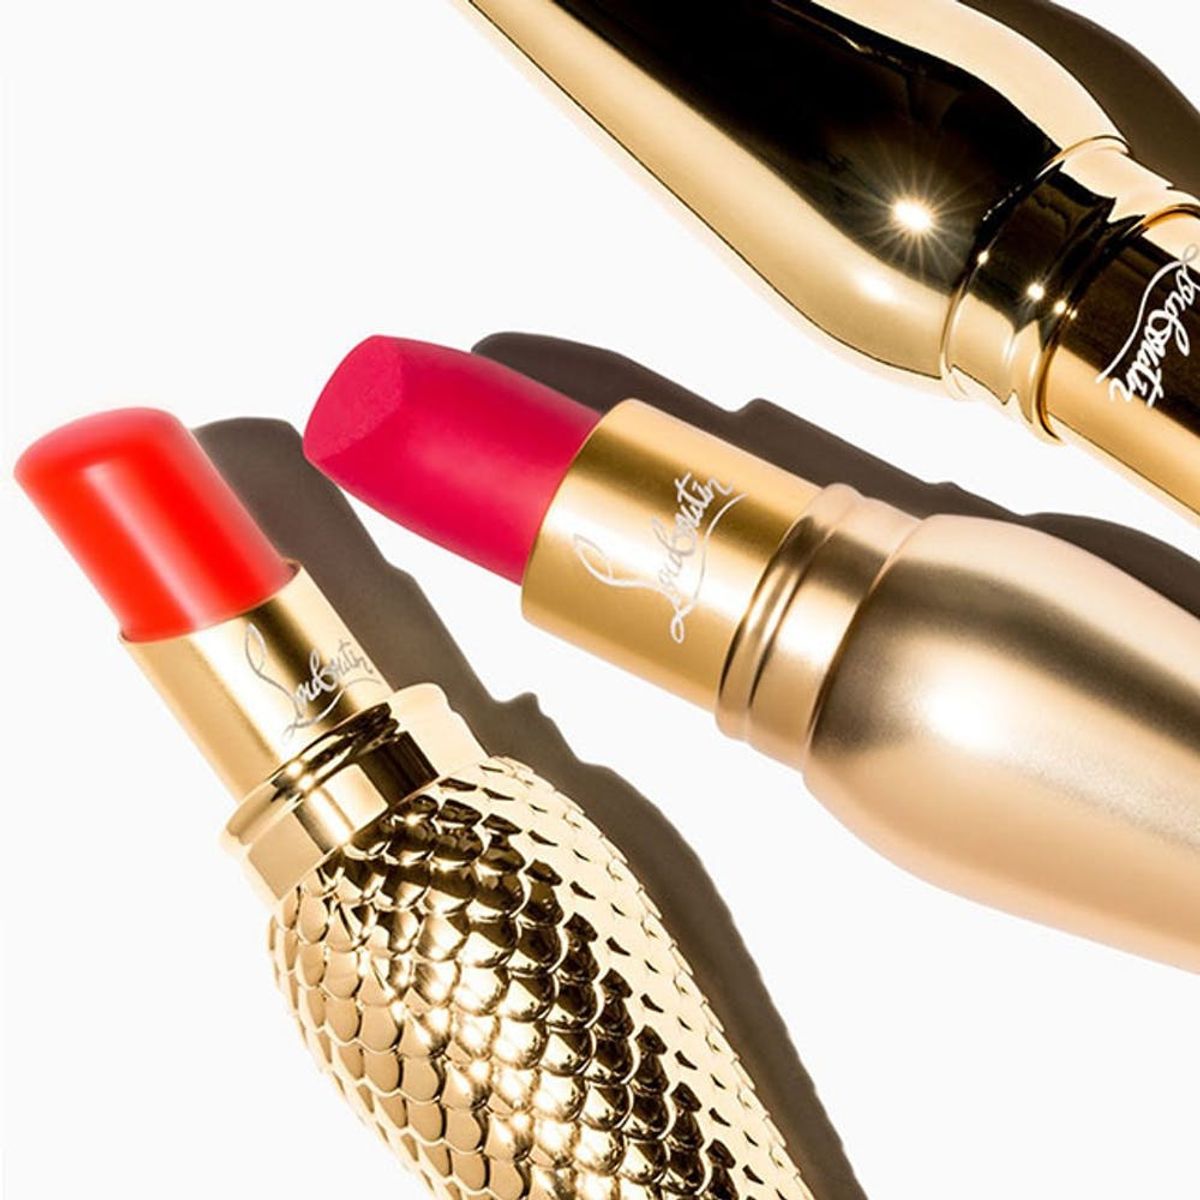 The New Louboutin Lipsticks Are as Swoon-Worthy as the Shoes